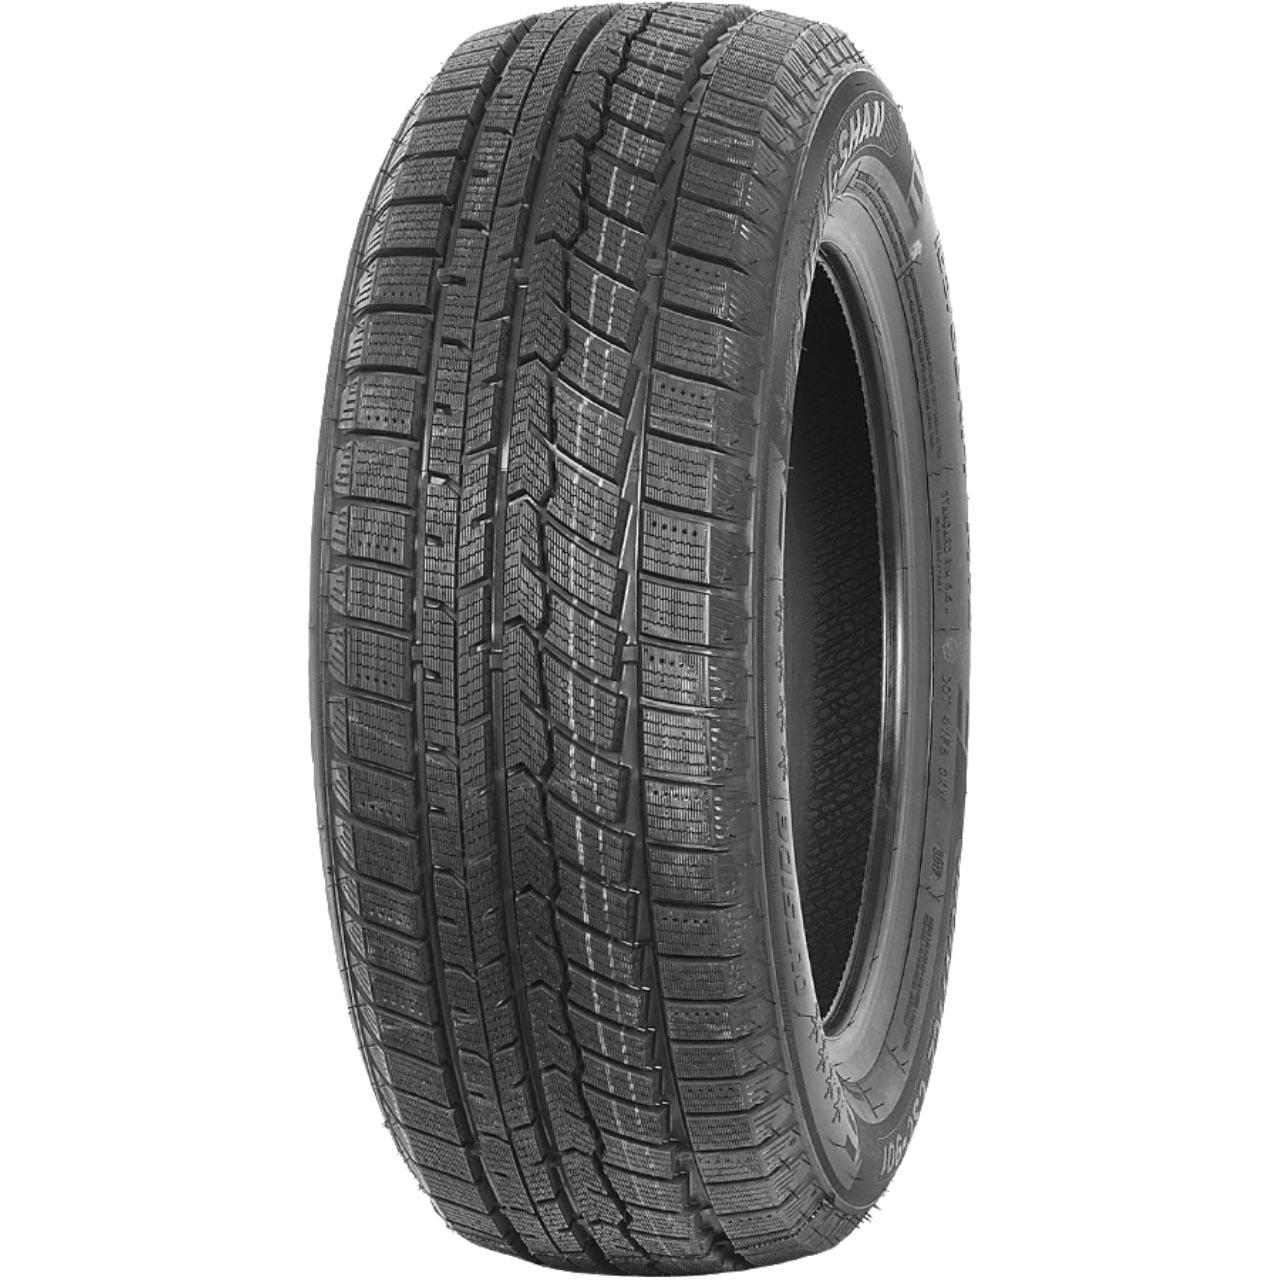 CHENGSHAN MONTICE CSC-901 225/55R17 101V BSW